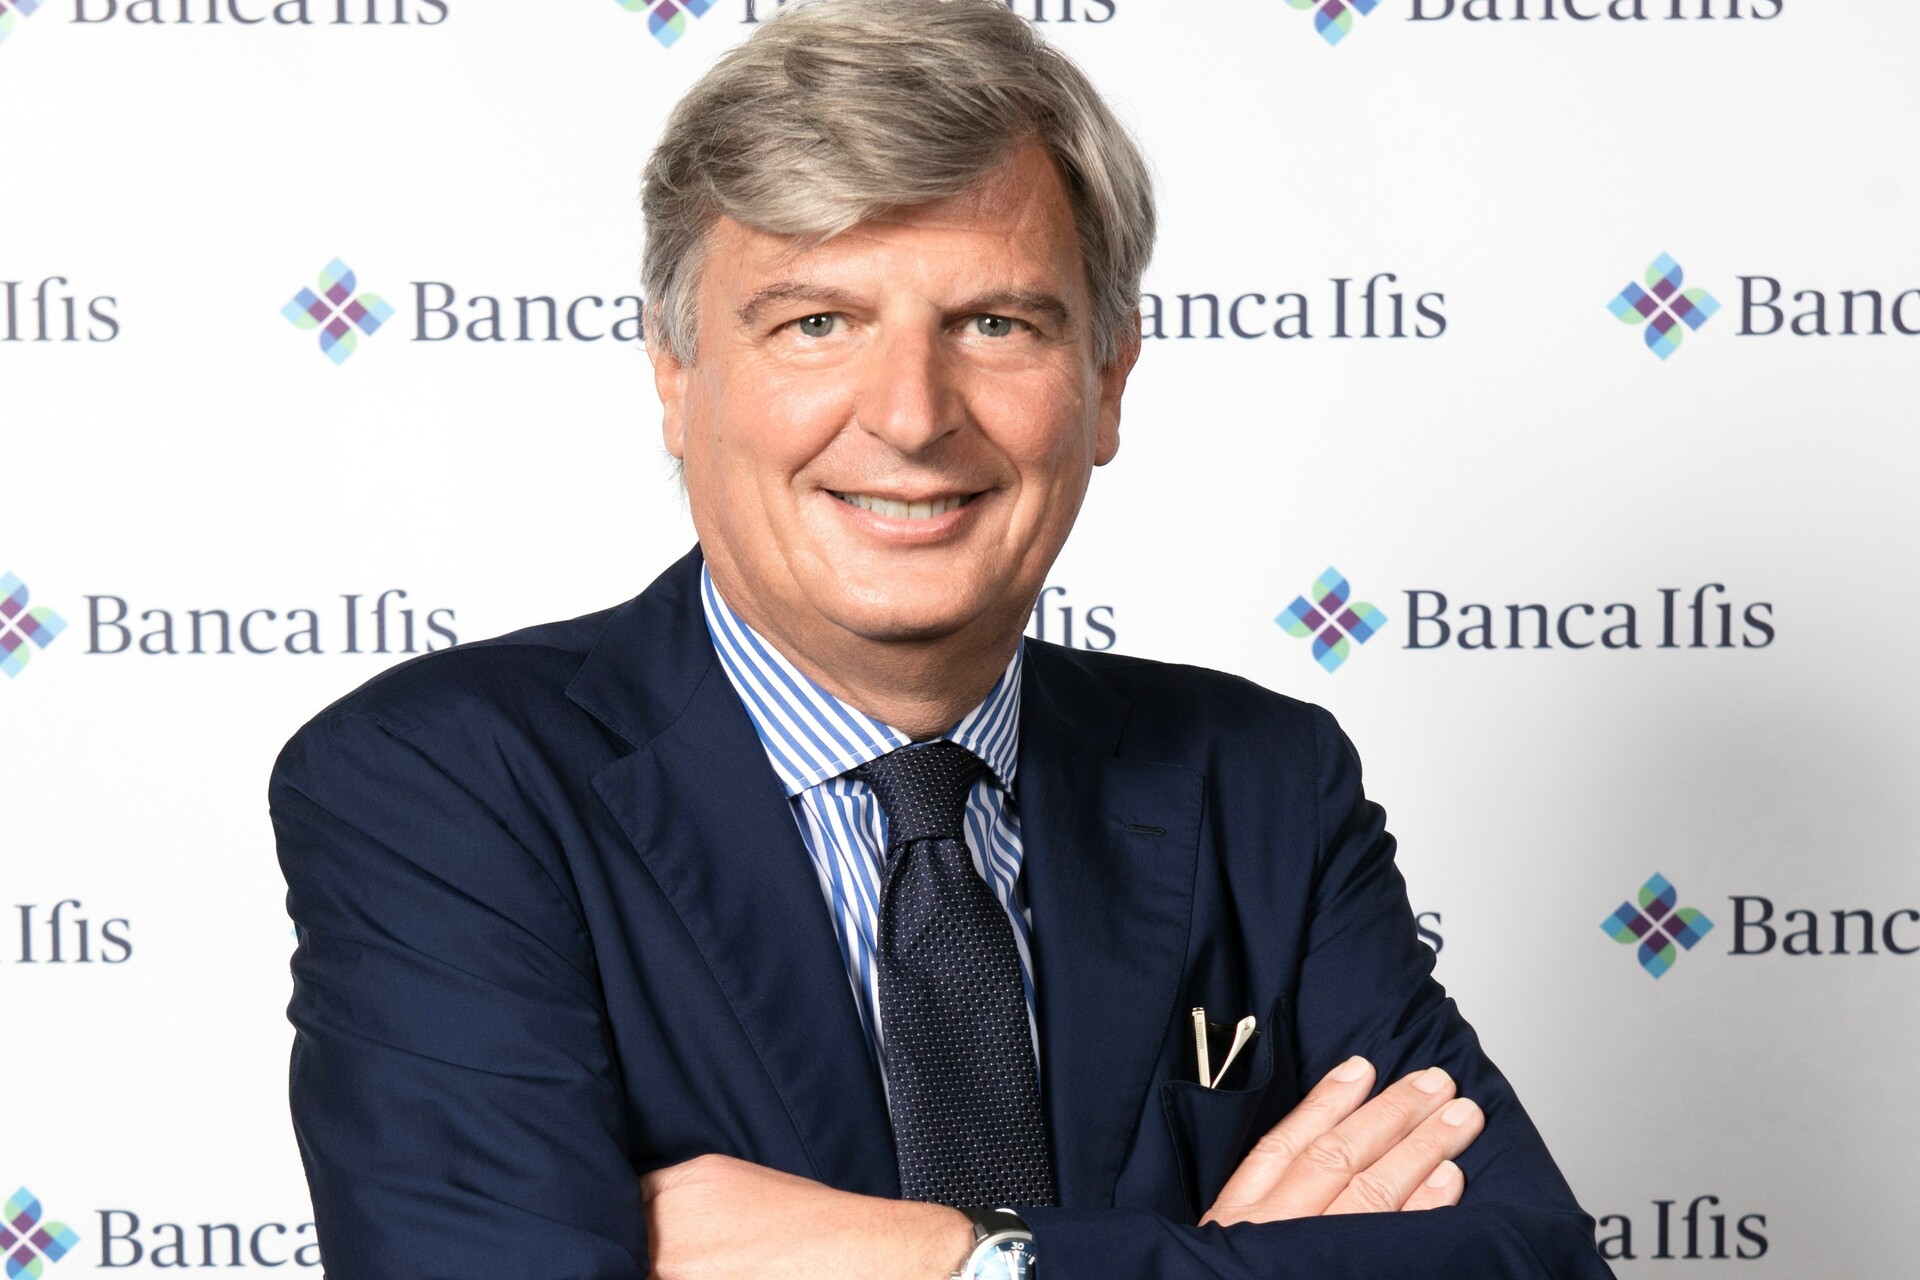 Banca Ifis: Save the Date! Conference Call 06.11.2020